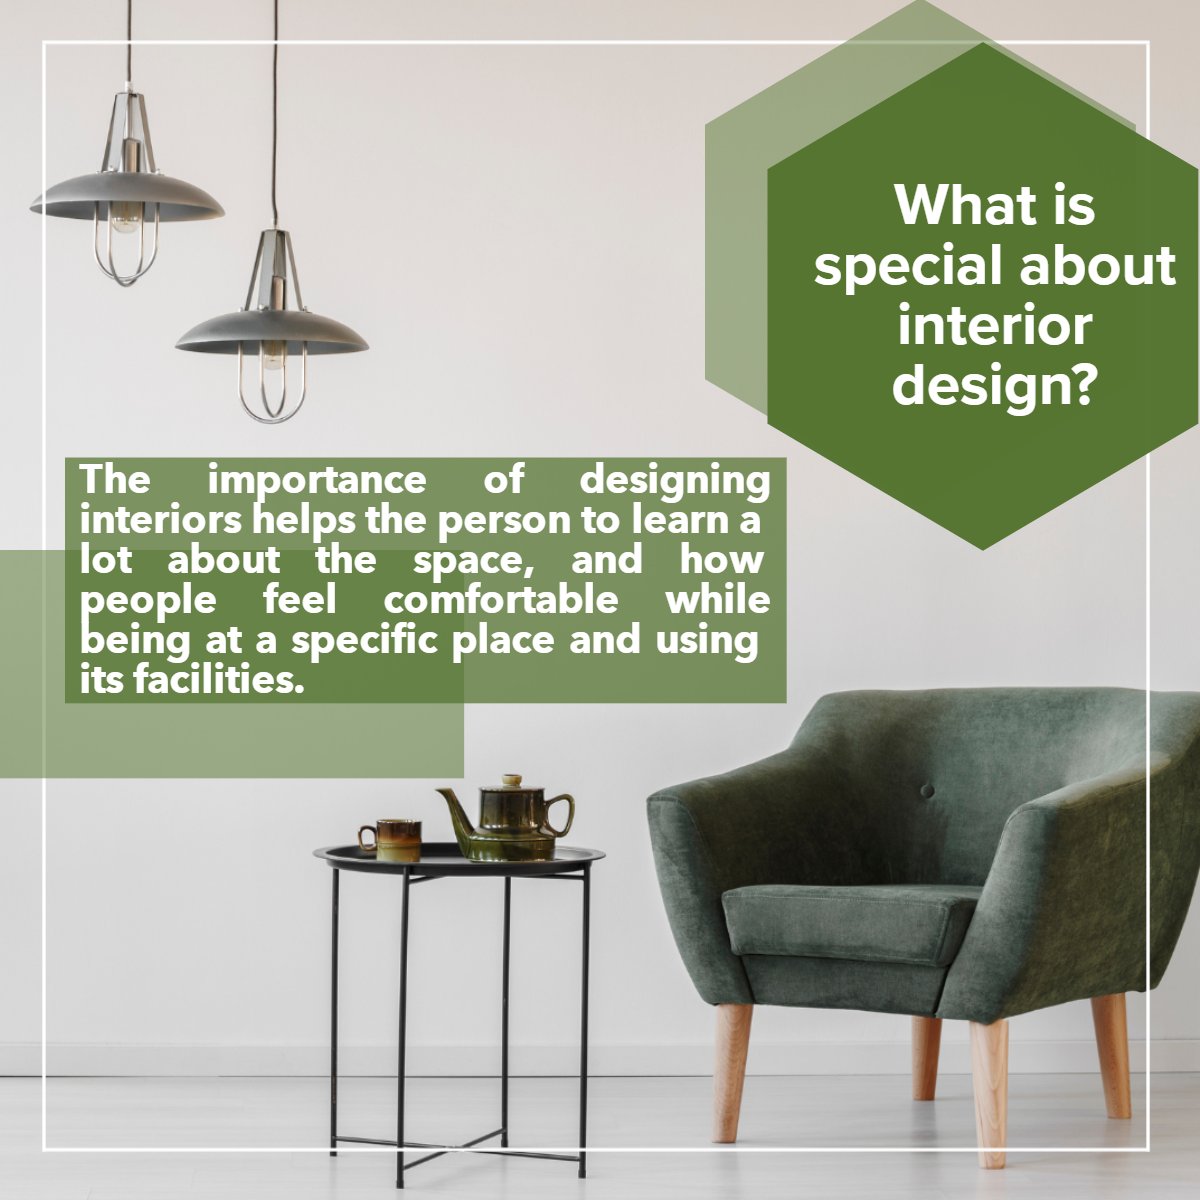 The interior of your home is important!

Do you have any interior design tips?

Feel free to share them below.

#interiordesigning #interiordesignlovers